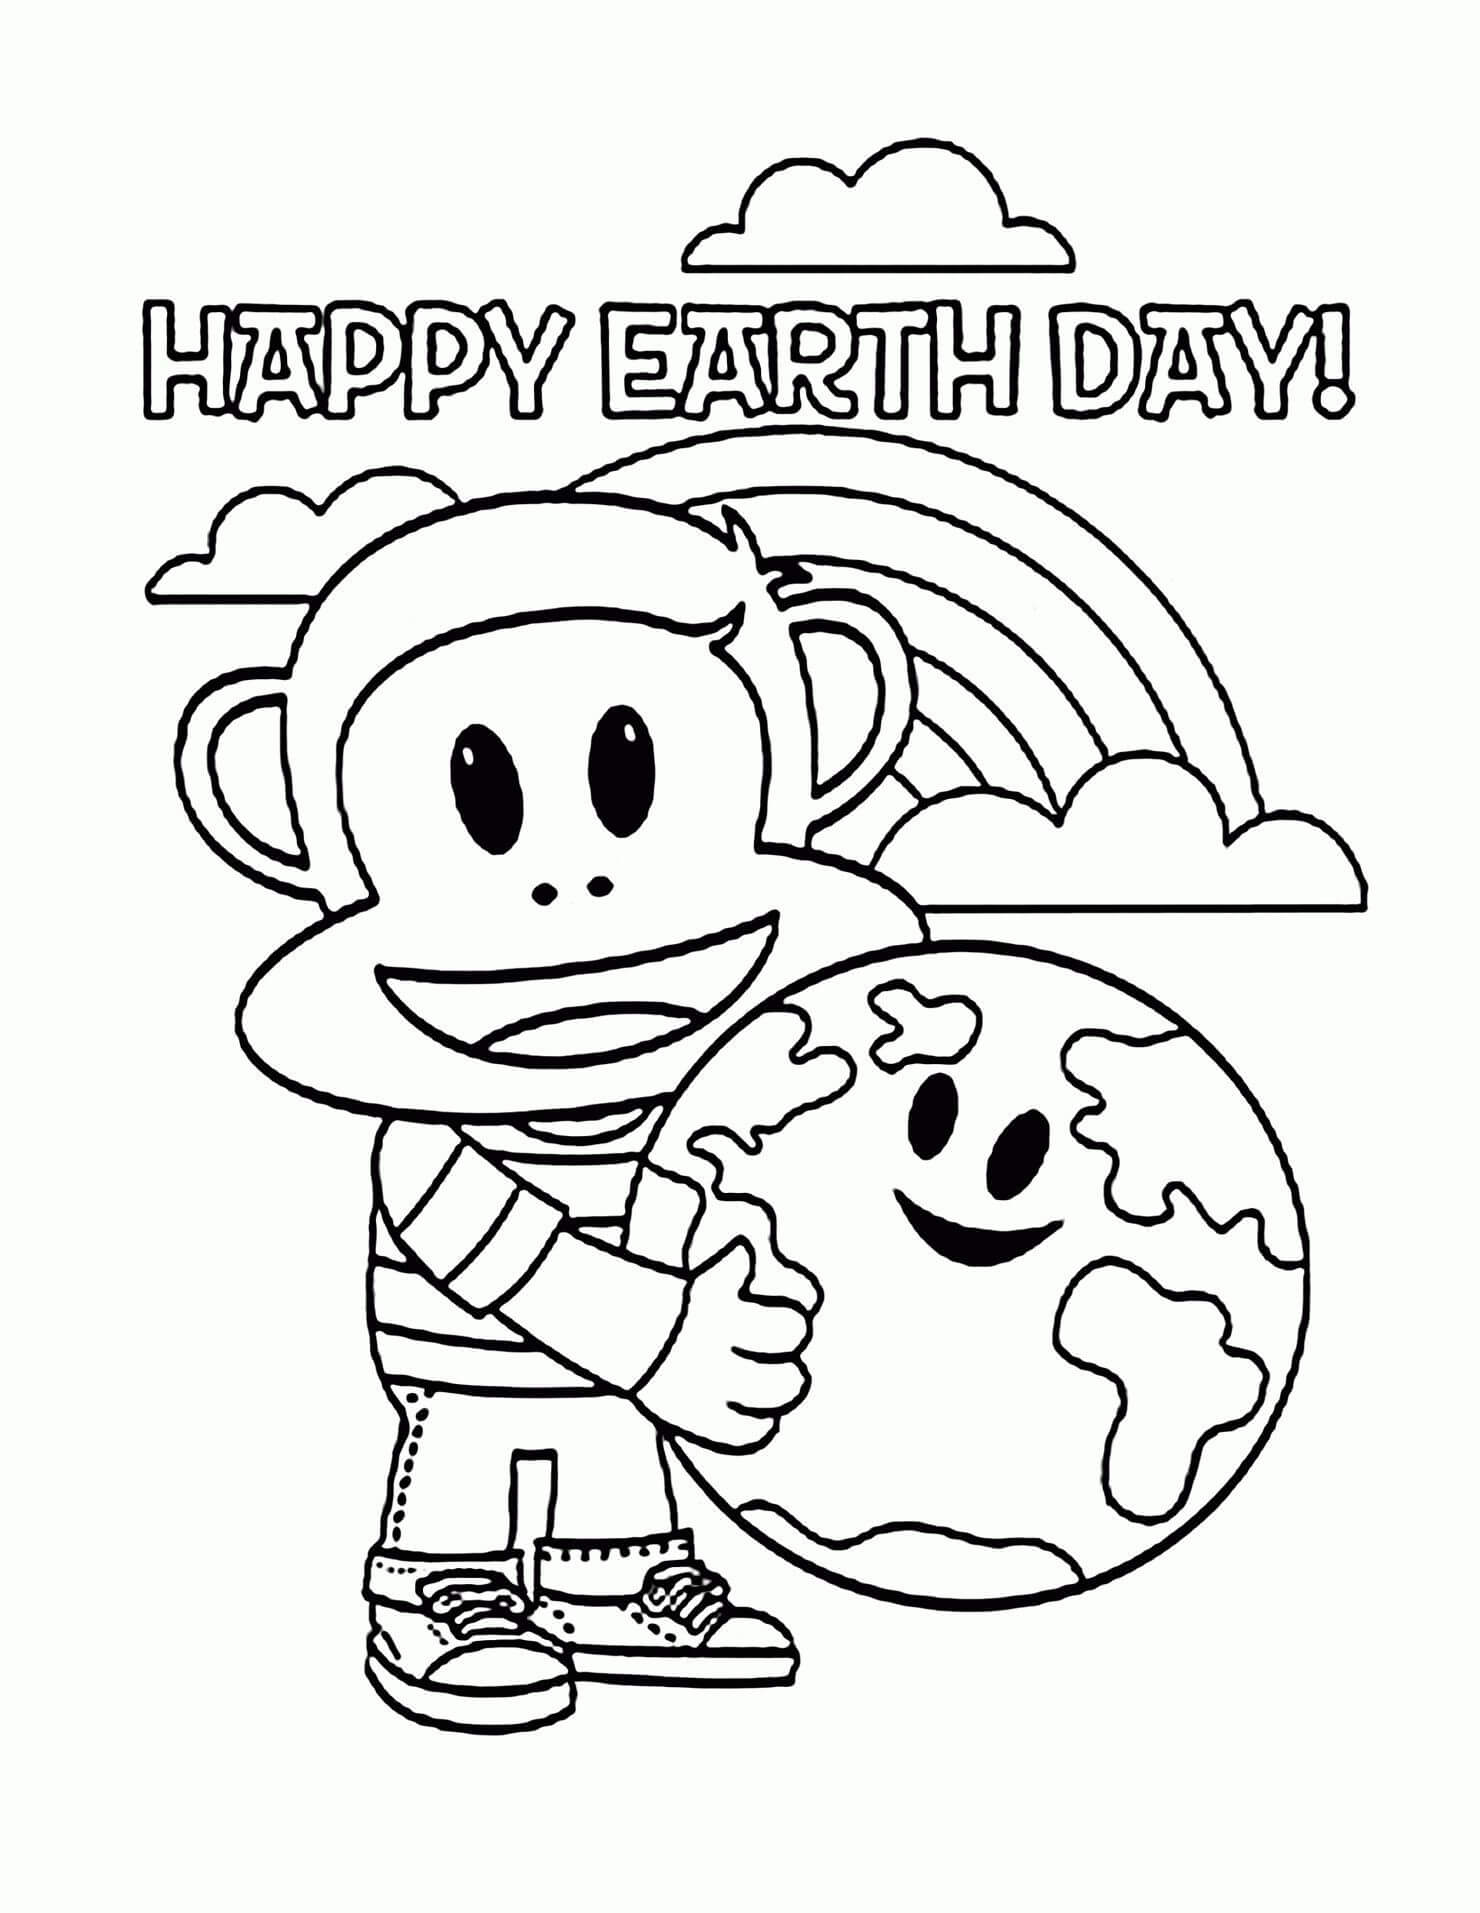 21-printable-earth-day-coloring-pages-holiday-vault